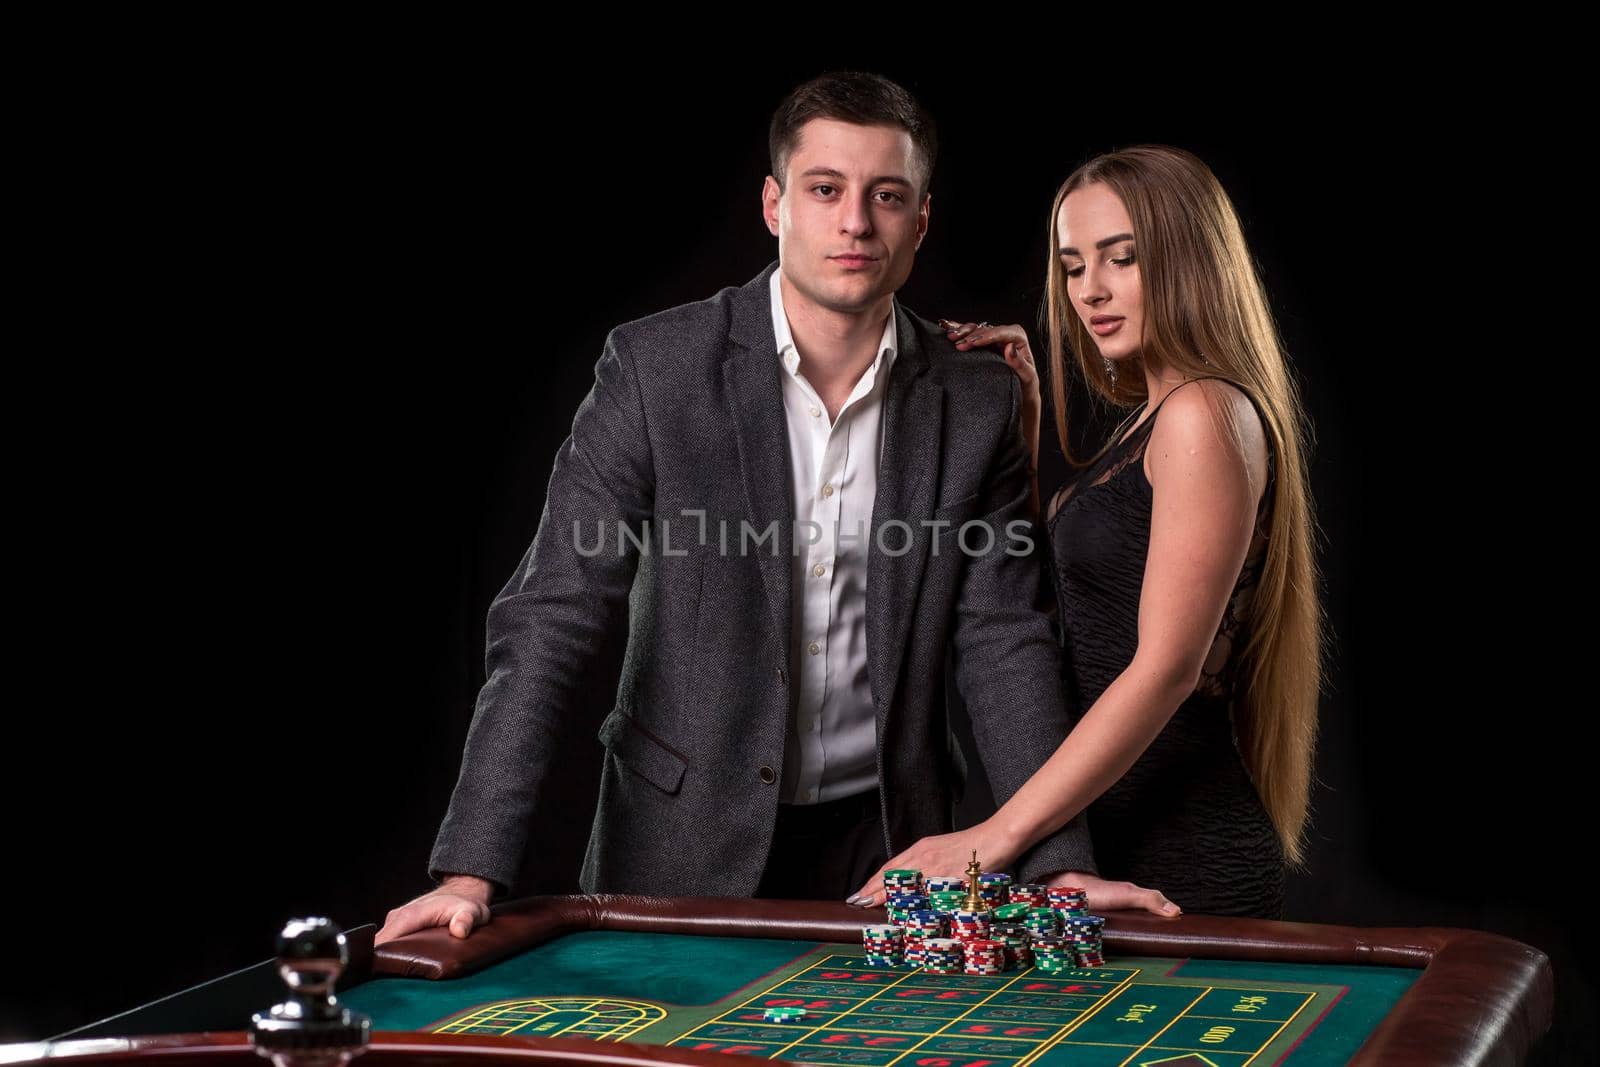 Elegant couple at the casino betting on the roulette, on a black background. A man in a suit with a beautiful young woman in a black dress